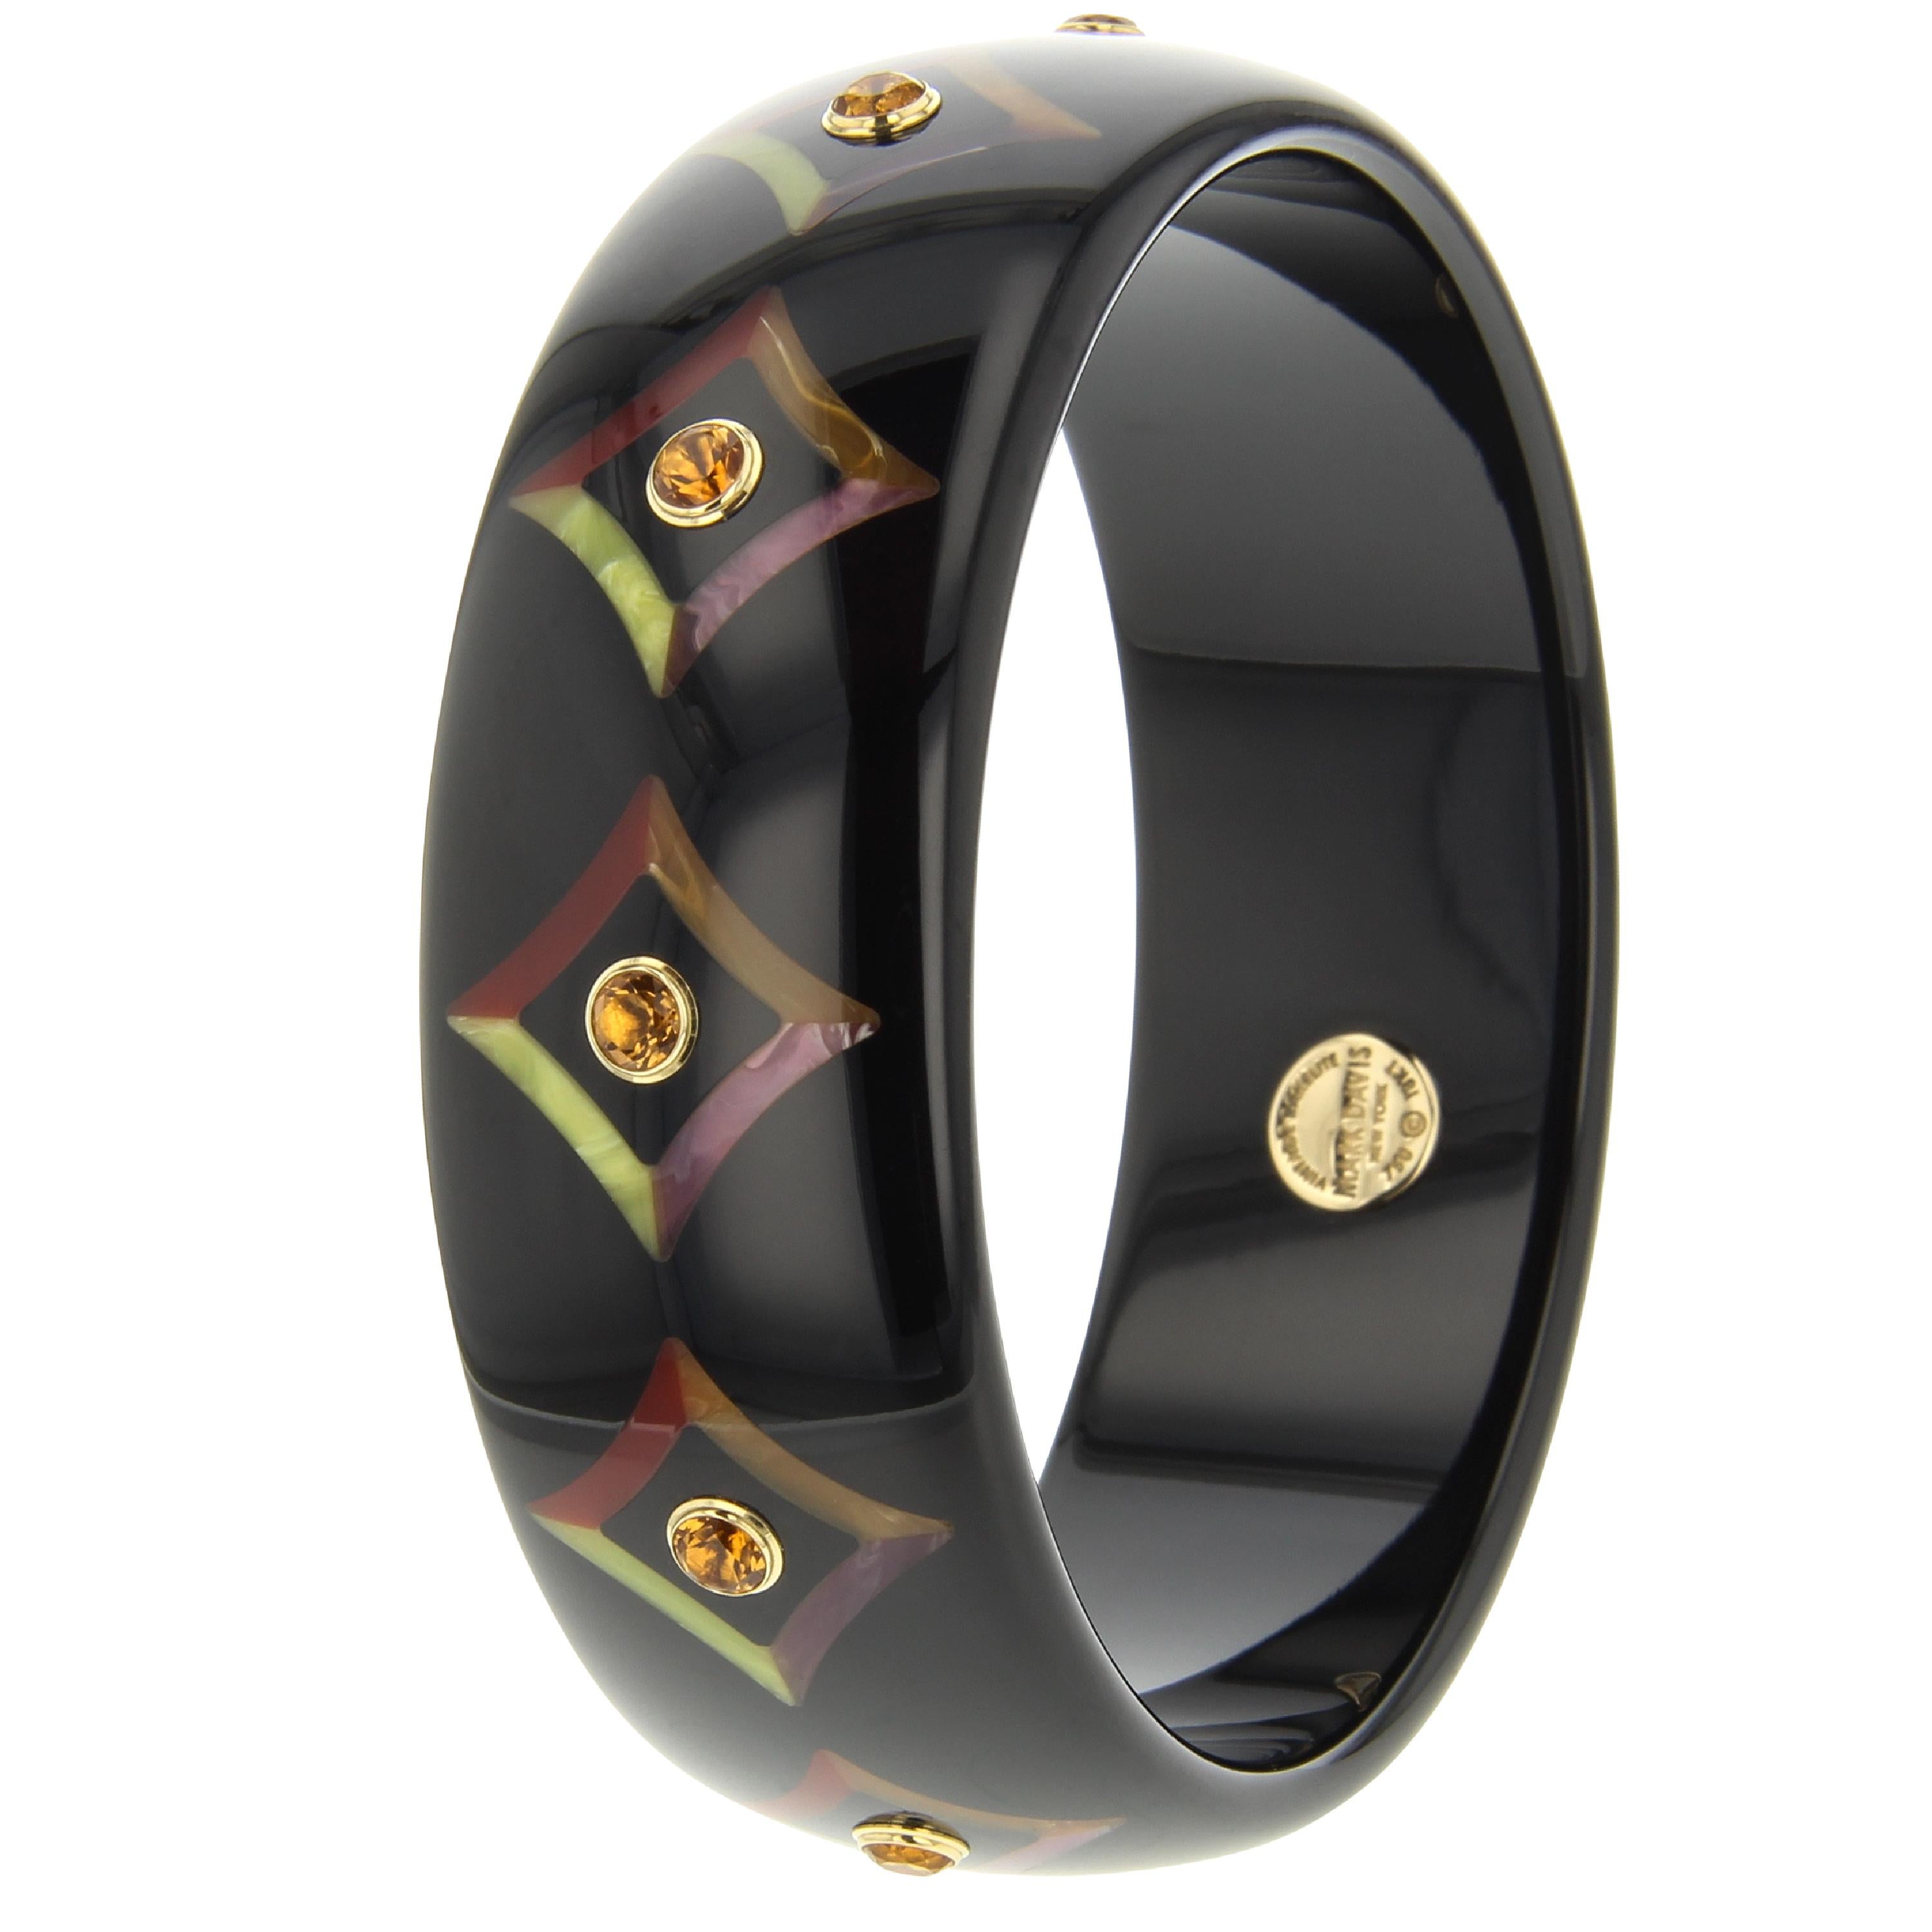 This chic and almost mysterious Mark Davis bangle was created from vintage, solid black bakelite that has been inlaid with a graphic indented diamond pattern. The inlaid pattern is created from burgundy, orange, pink and yellow bakelite. The center